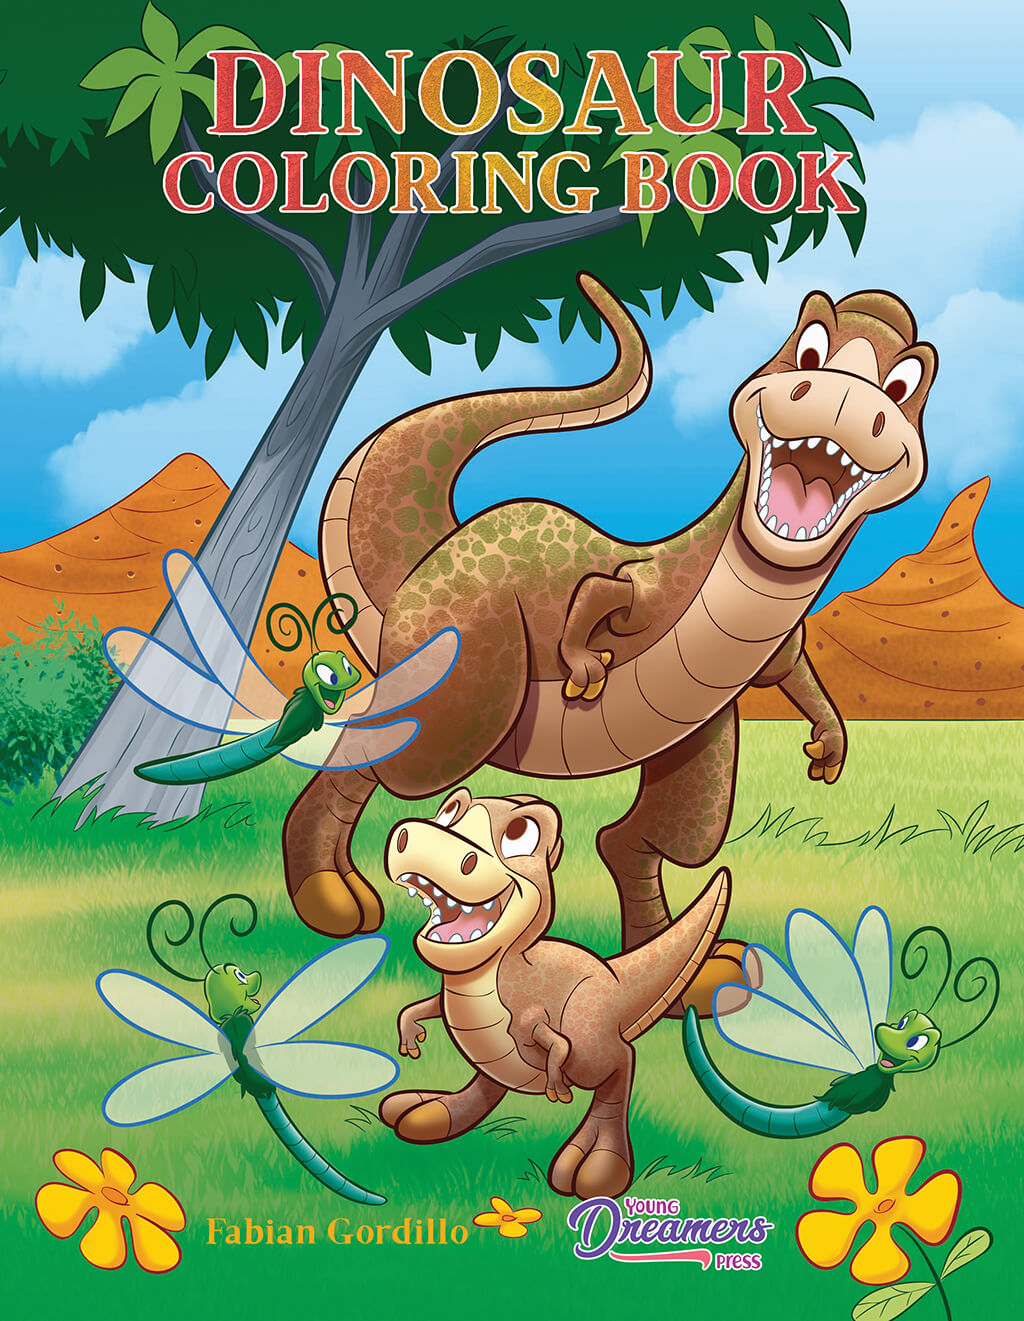 Dinosaur Coloring Book: For Kids Ages 4-8, 9-12